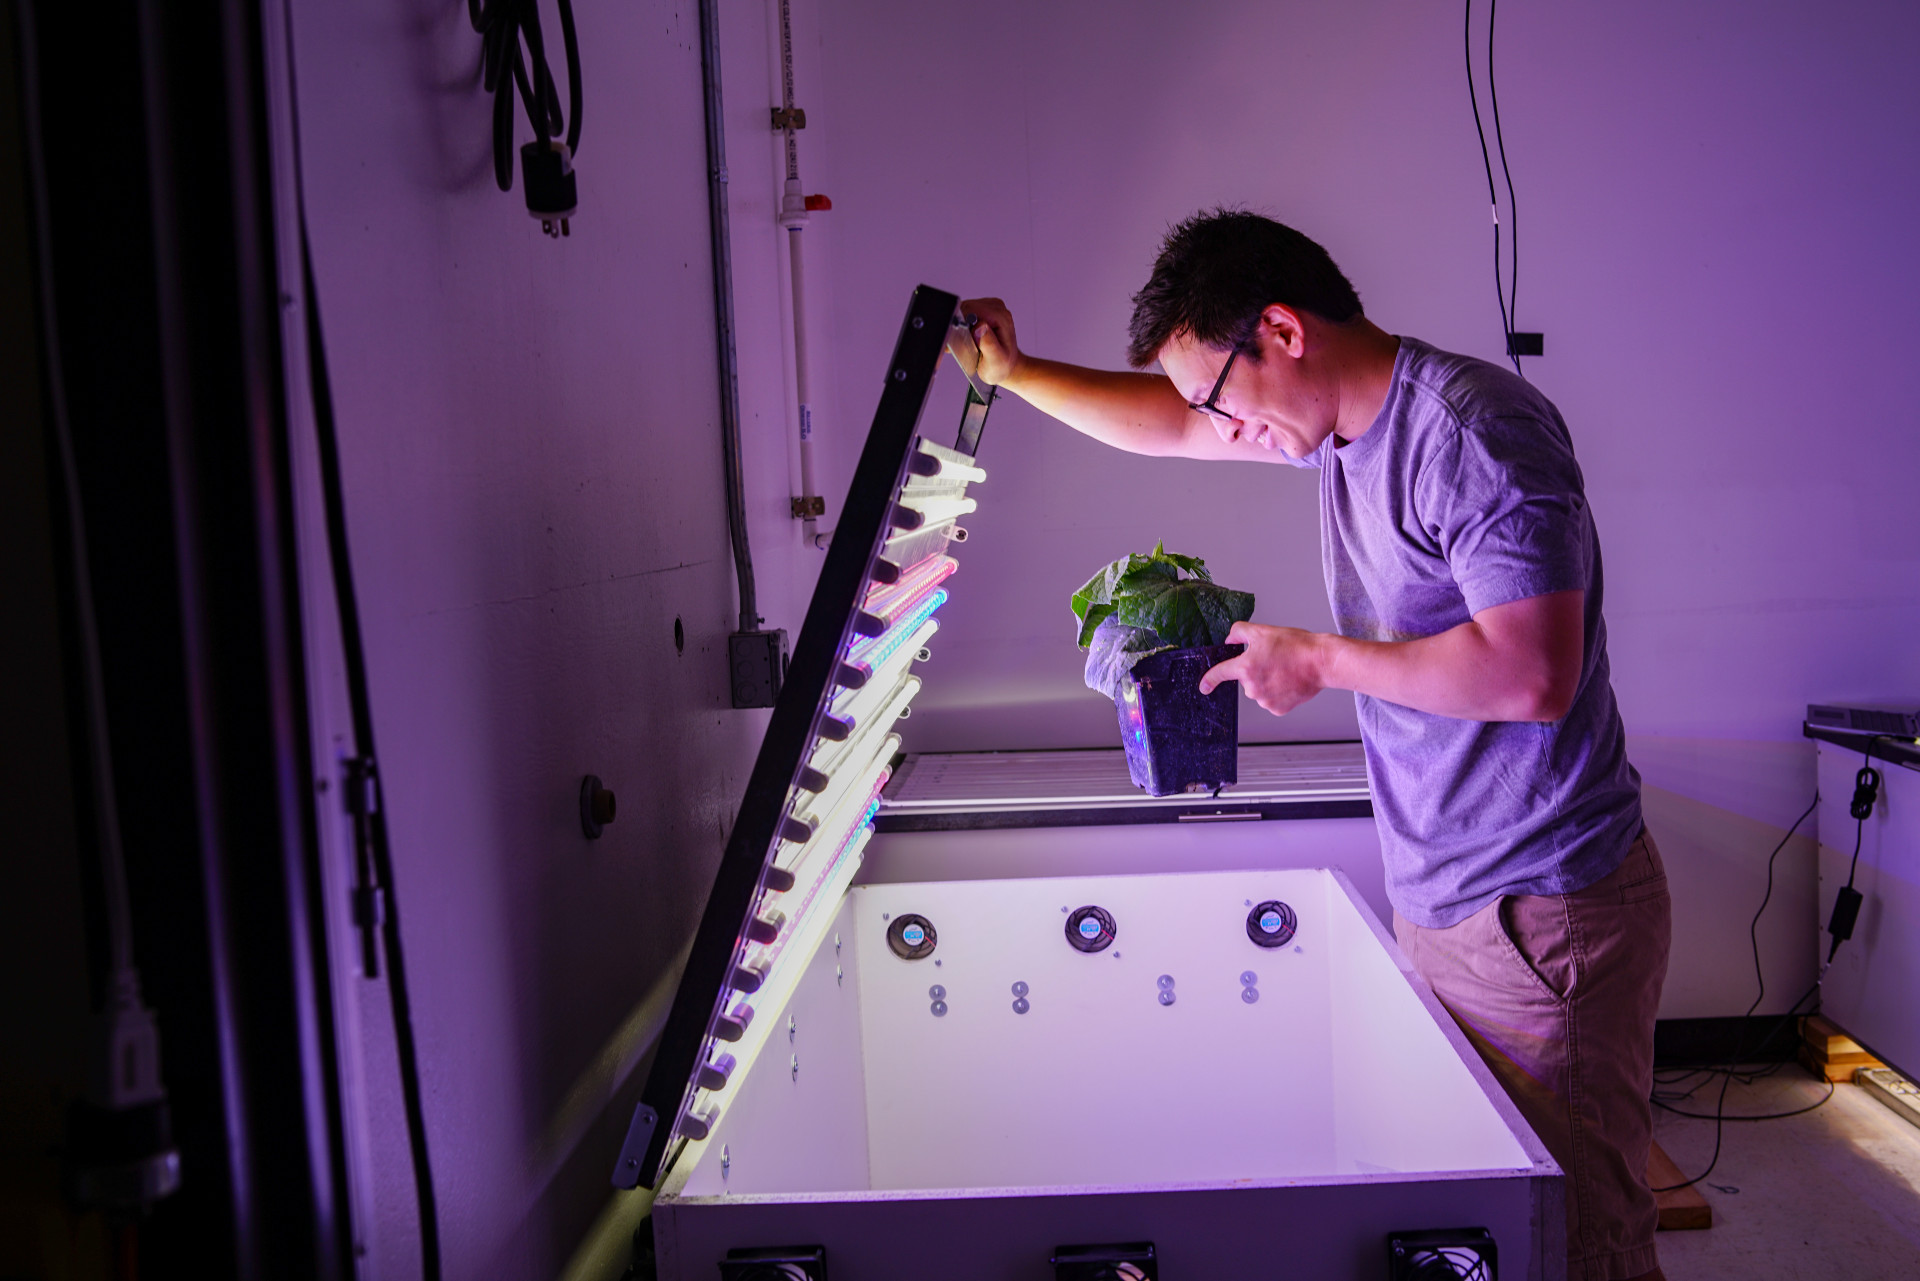 researcher with plant testing growth in alternate light color and intensity